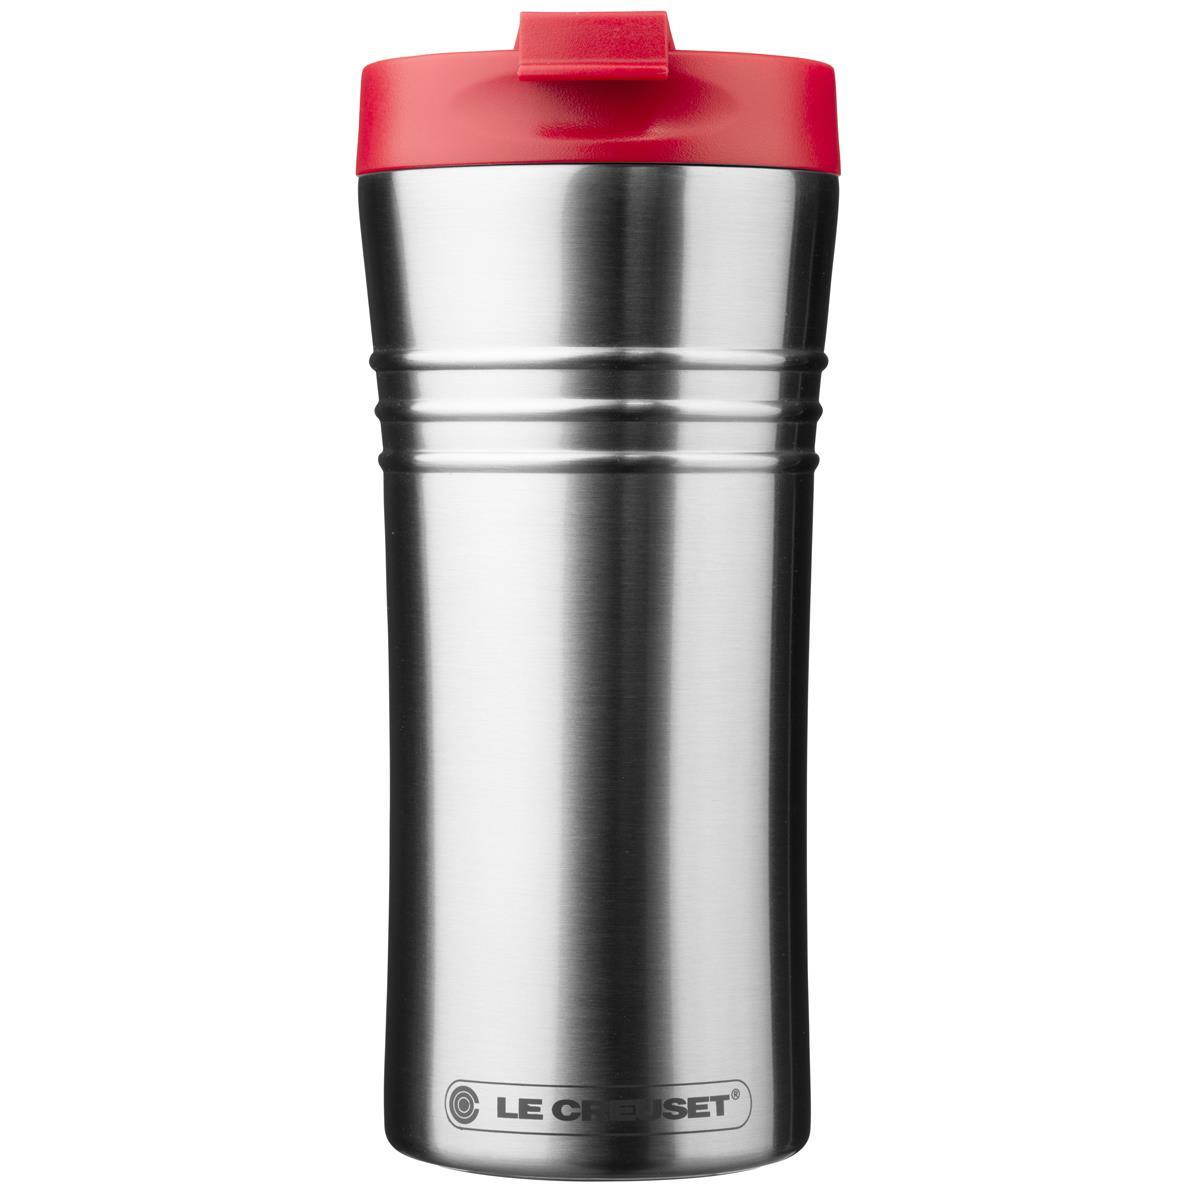 What are the uses of the Le Creuset travel mug made of stainless steel?